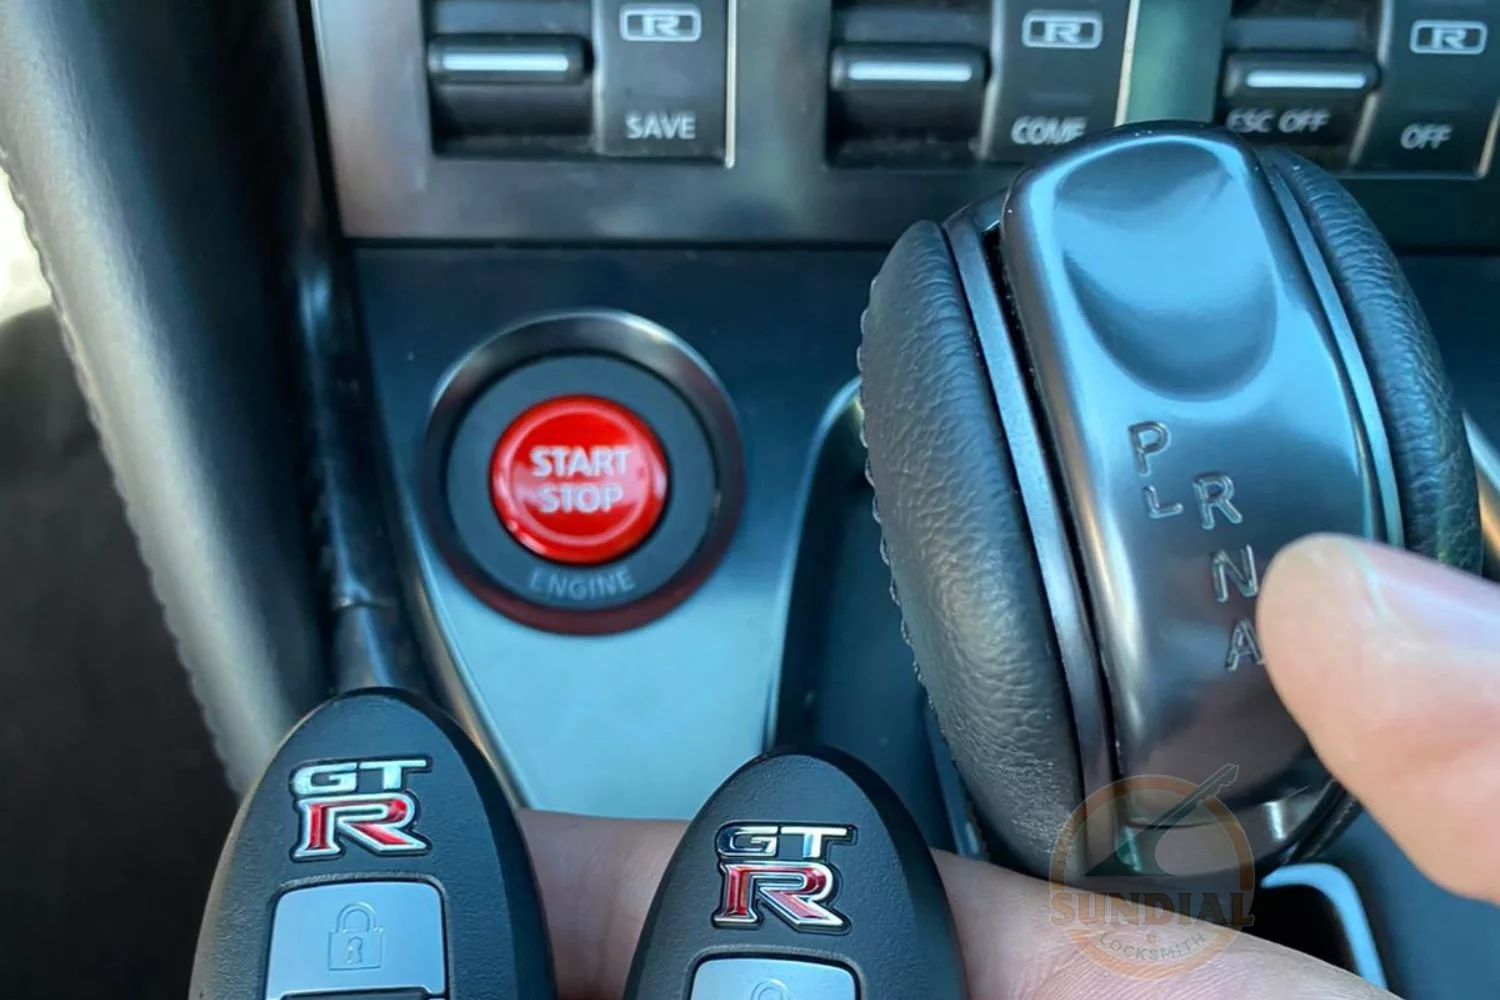 A hand holding two key fobs with the GT-R logo in front of the Nissan GT-R's start button and gear selector